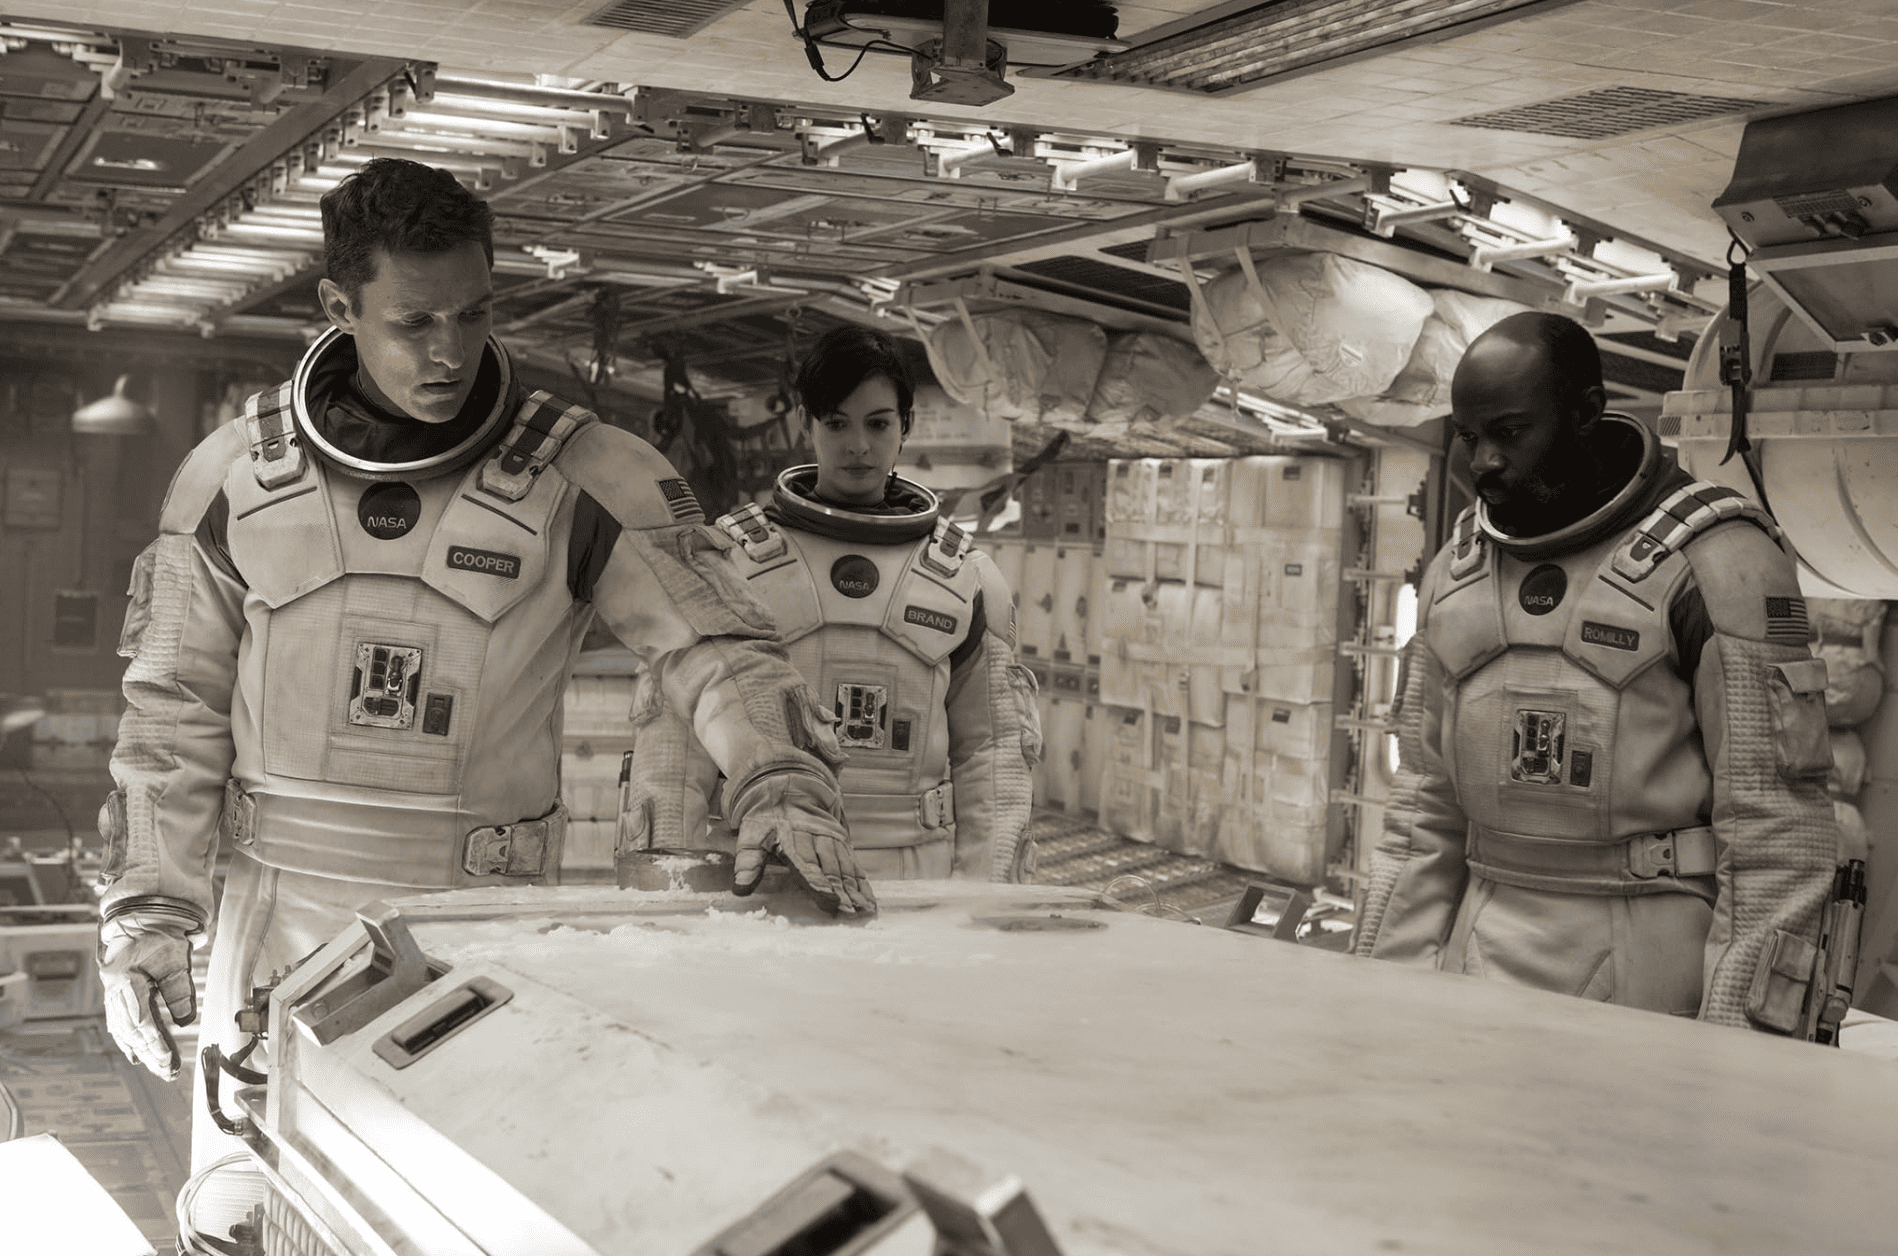 Three astronauts discover a cryo-chamber in this image from Paramount Pictures